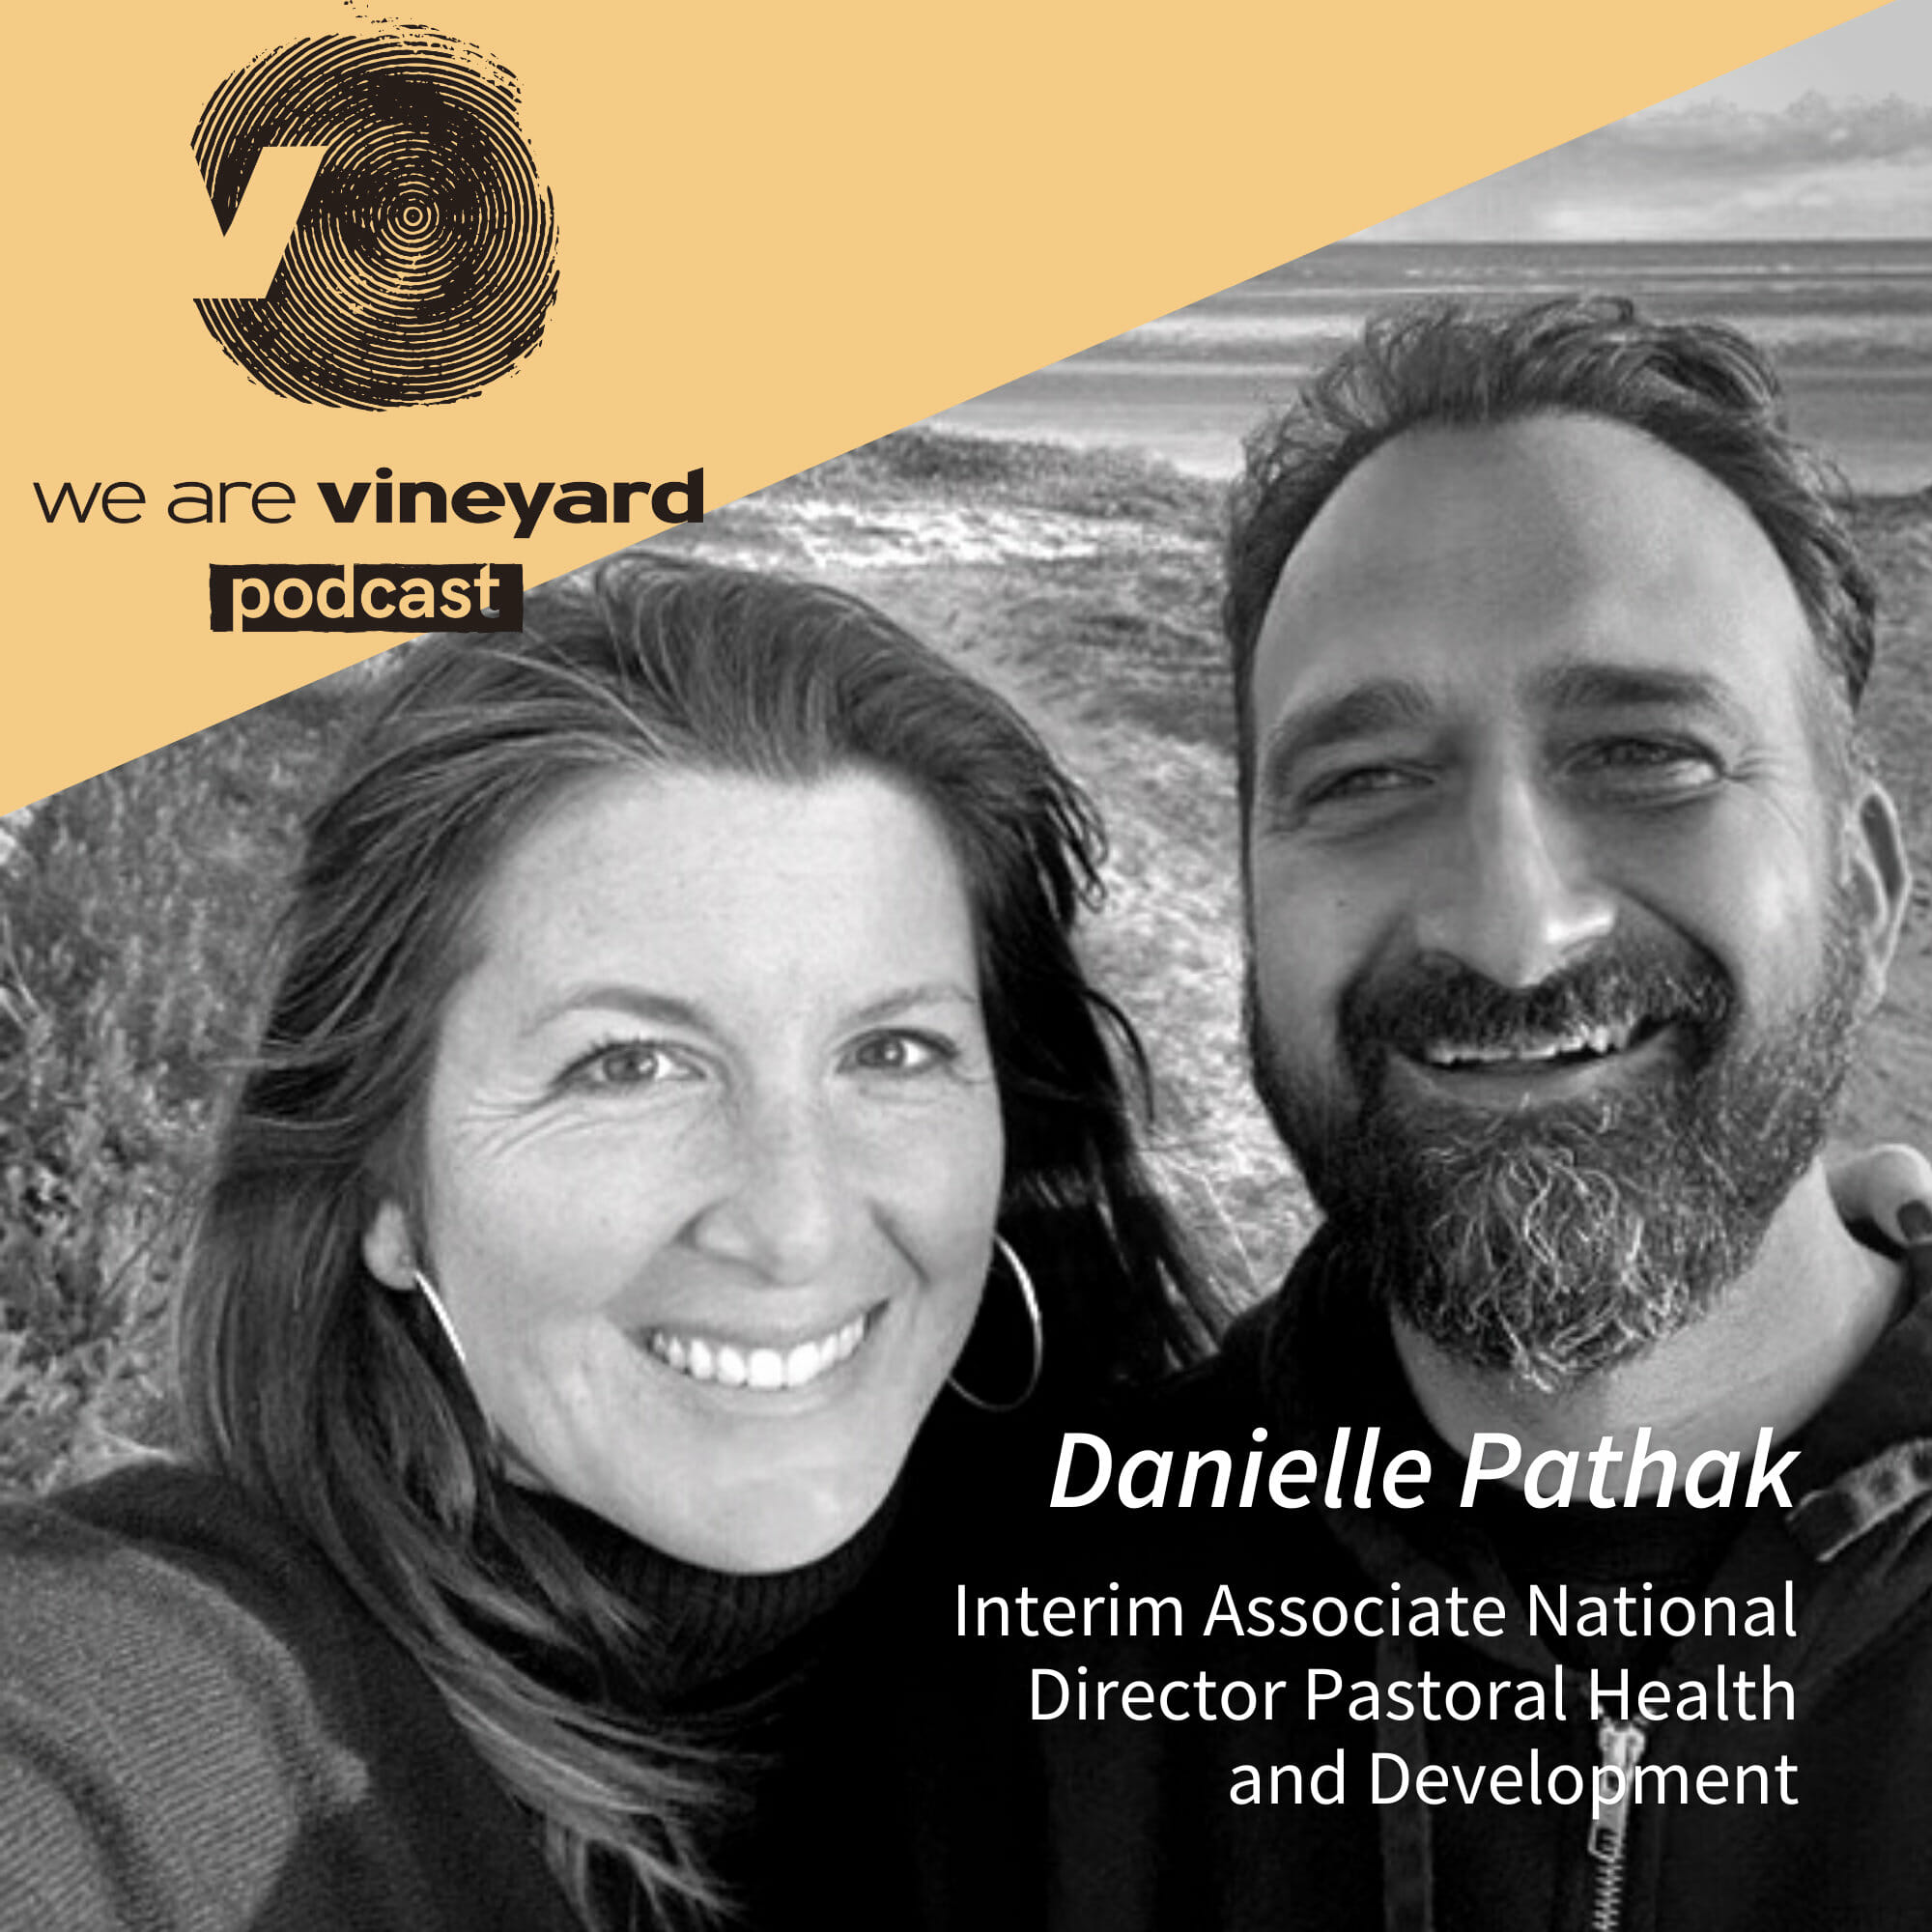 Danielle Pathak: Casting A Vision For Pastoral Health In The Vineyard